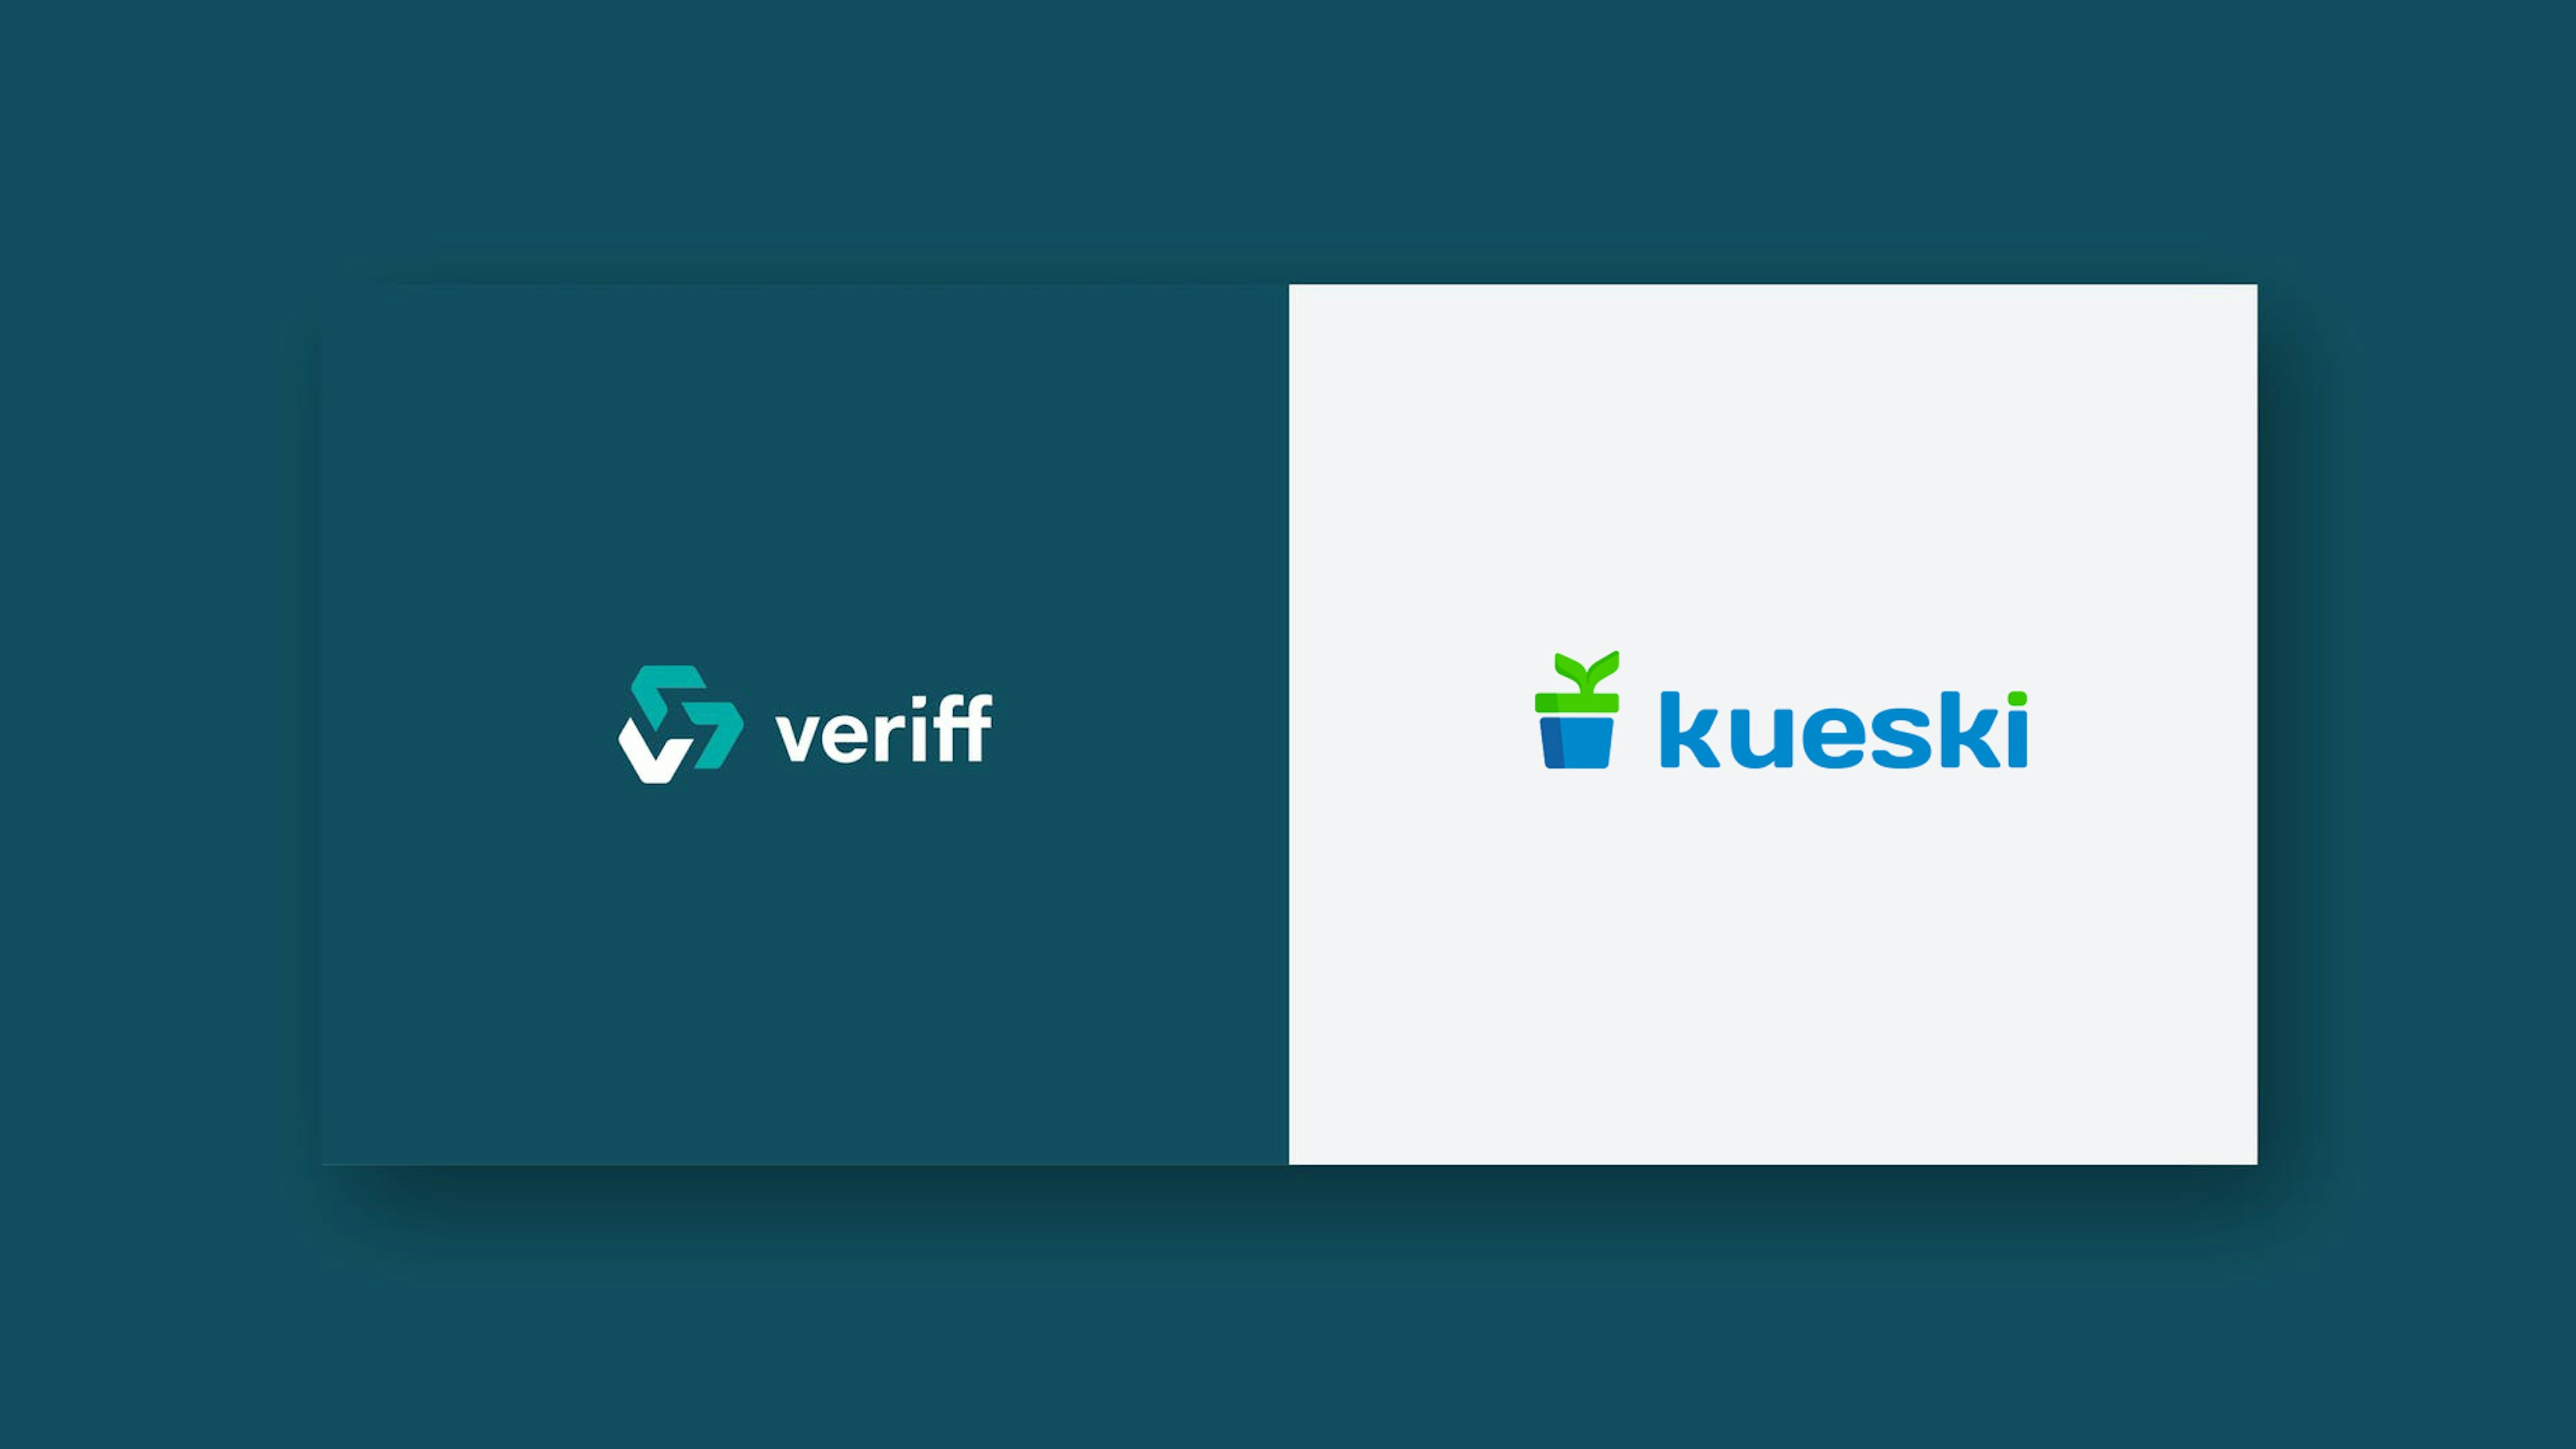 Kueski deploys online ID verification to expand financial services